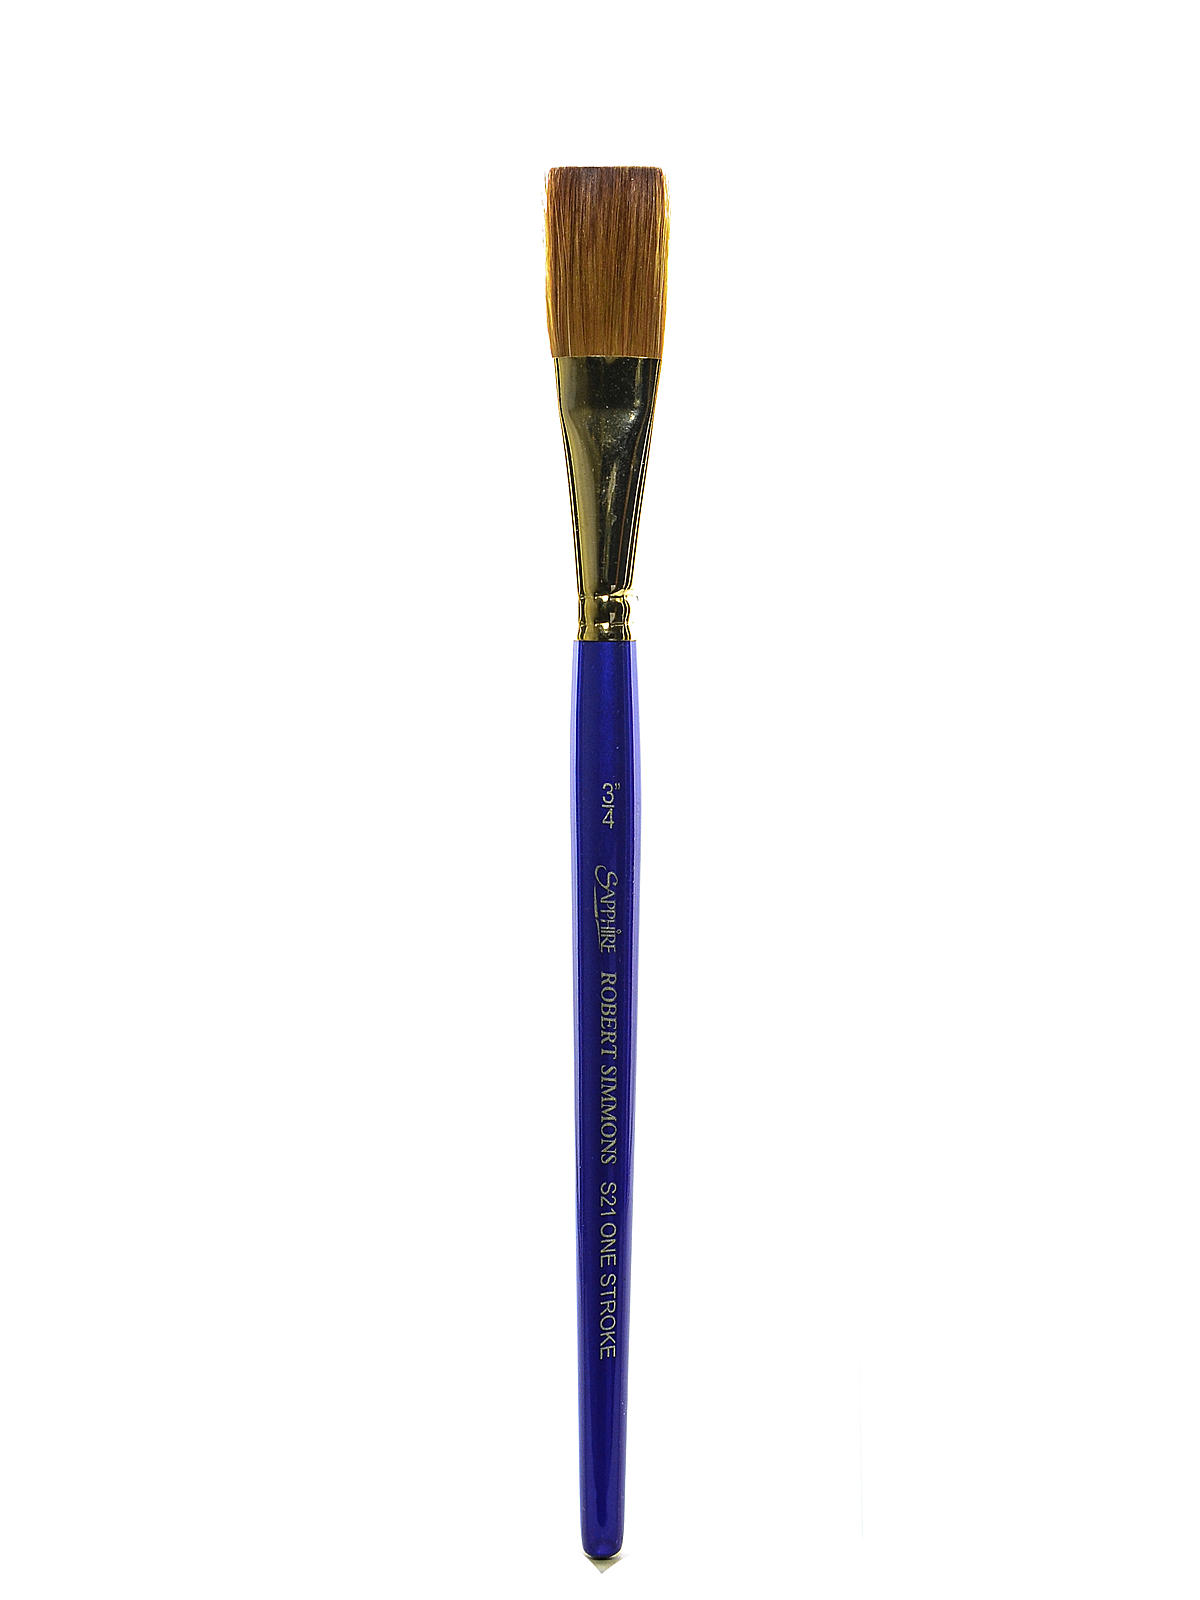 Sapphire Series Synthetic Brushes Short Handle 3 4 In. One Stroke Flat Wash S21